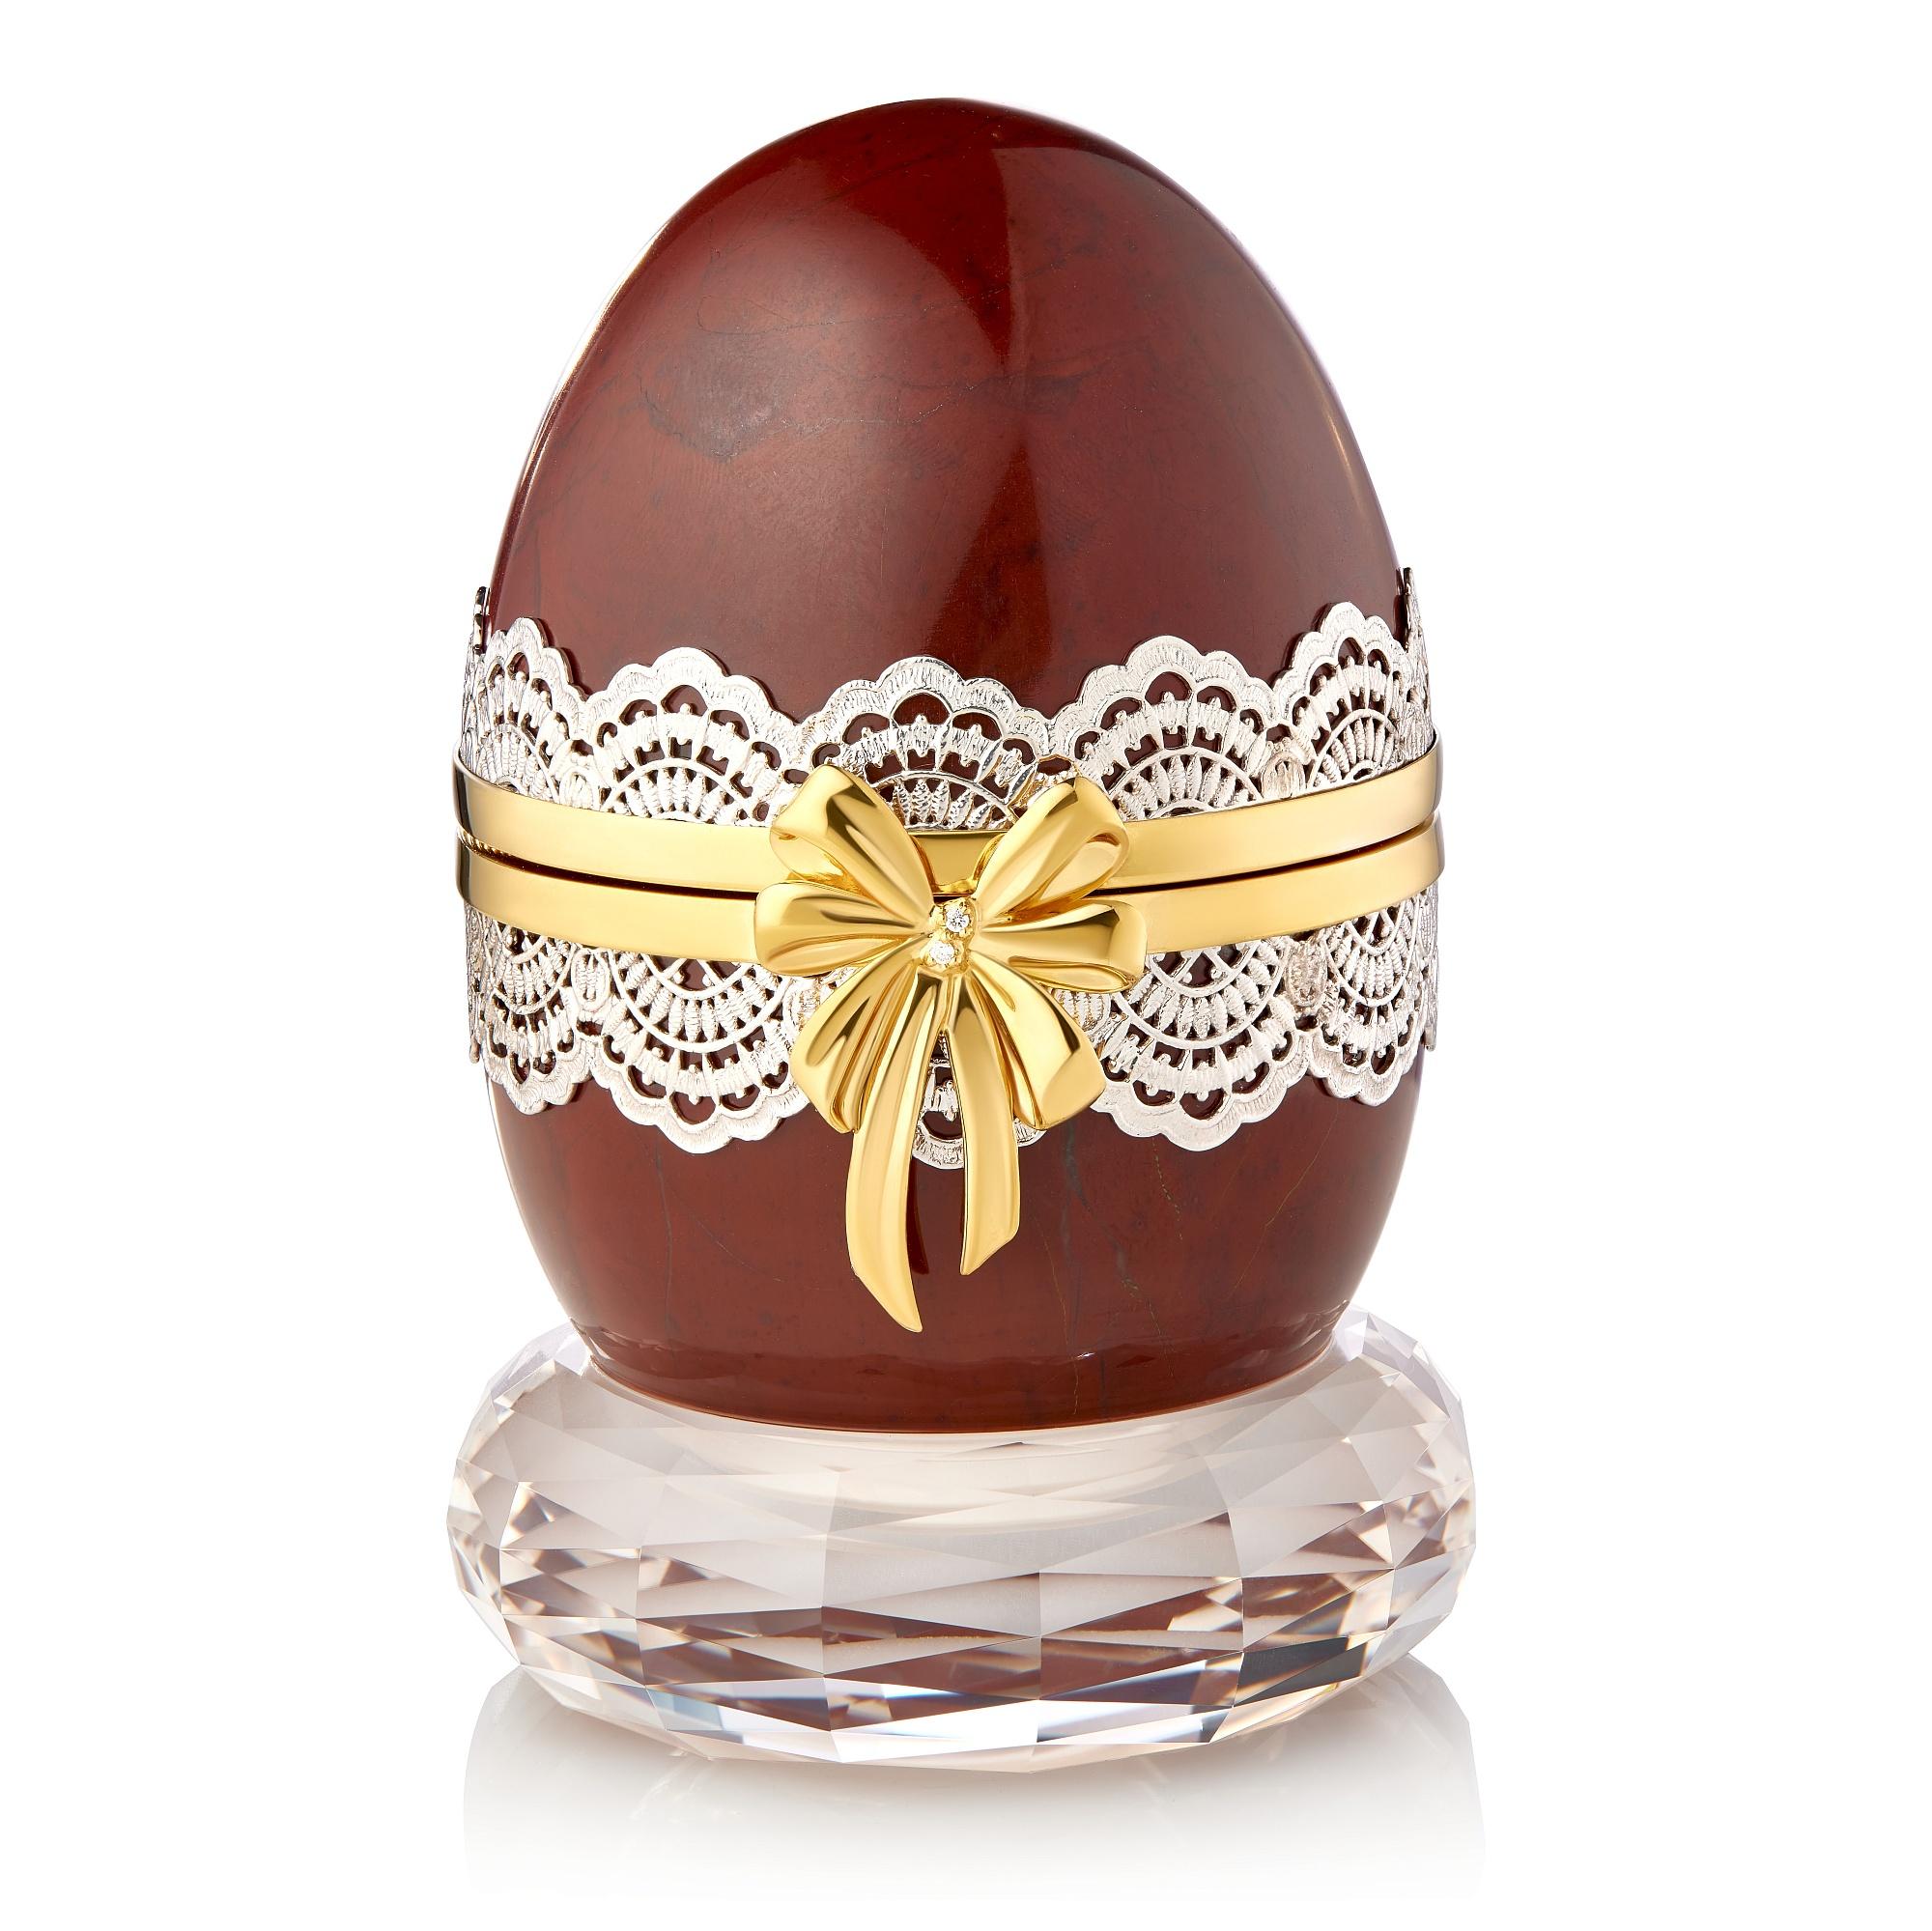 MOISEIKIN's stunning Silver Gold-Plated Easter Egg is an inspiring and enchanting miniature to prepare for this year's Easter Holiday. 

This ornate Easter Egg is carefully carved out from natural jasper and adorned with a delicate ribbon and